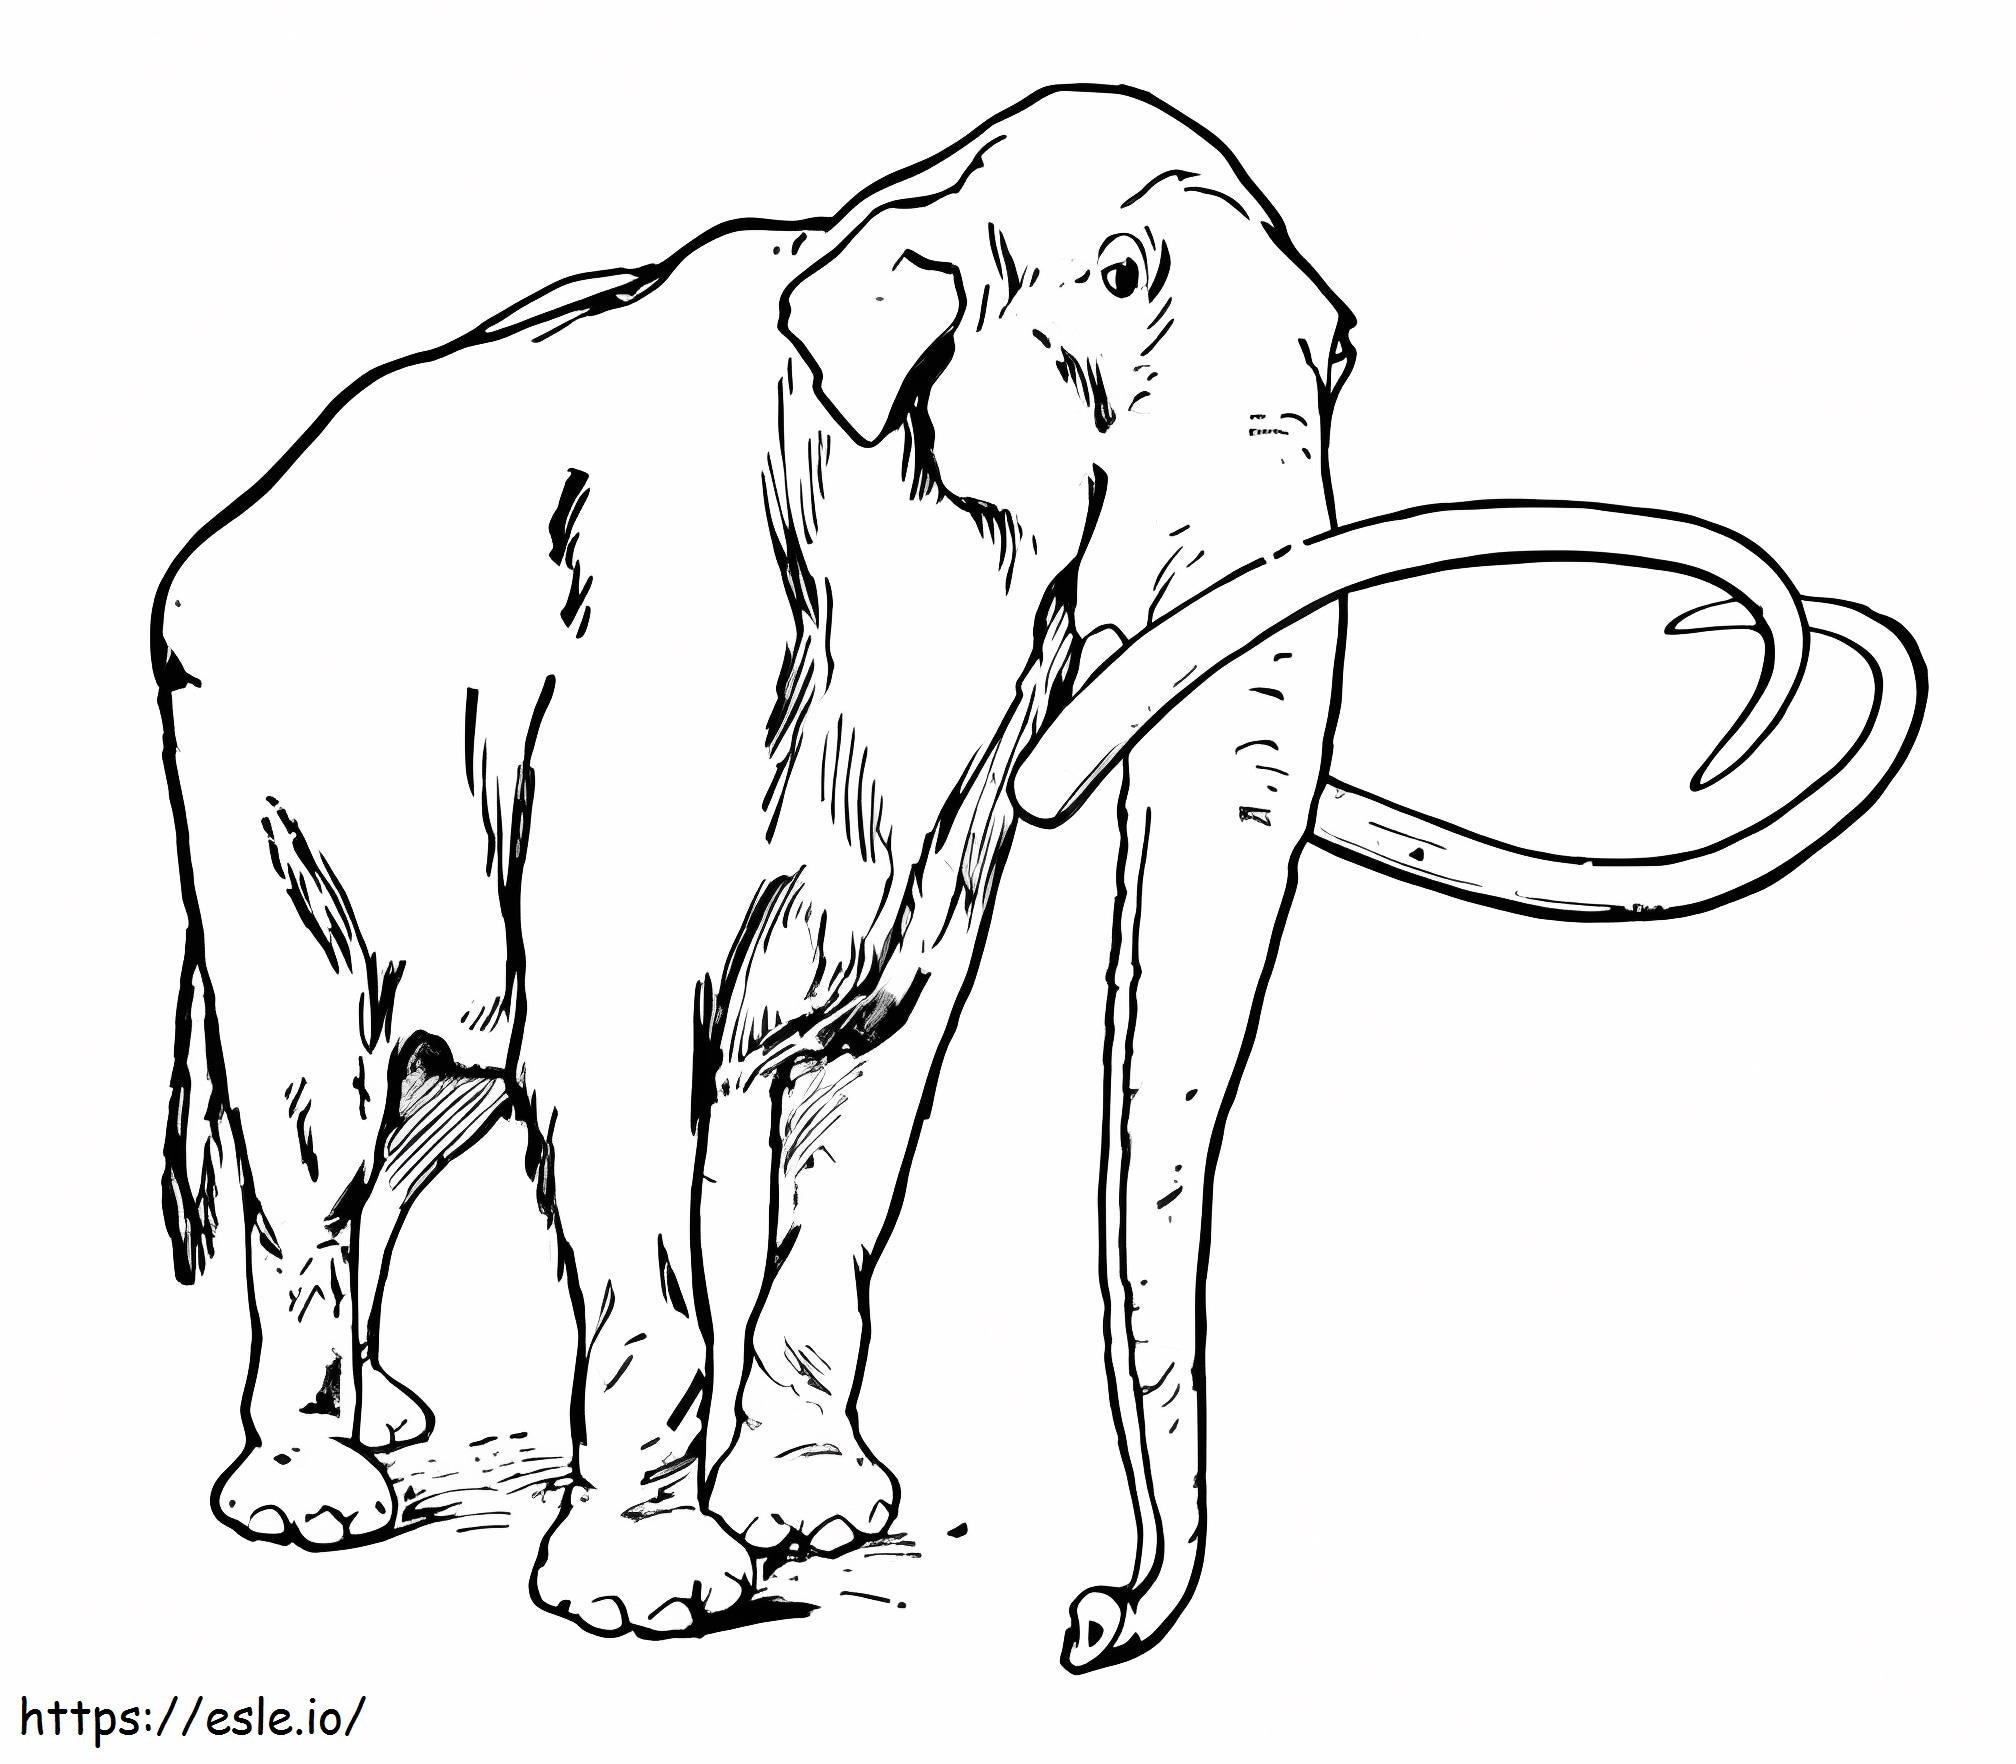 A Wooly Mammoth coloring page